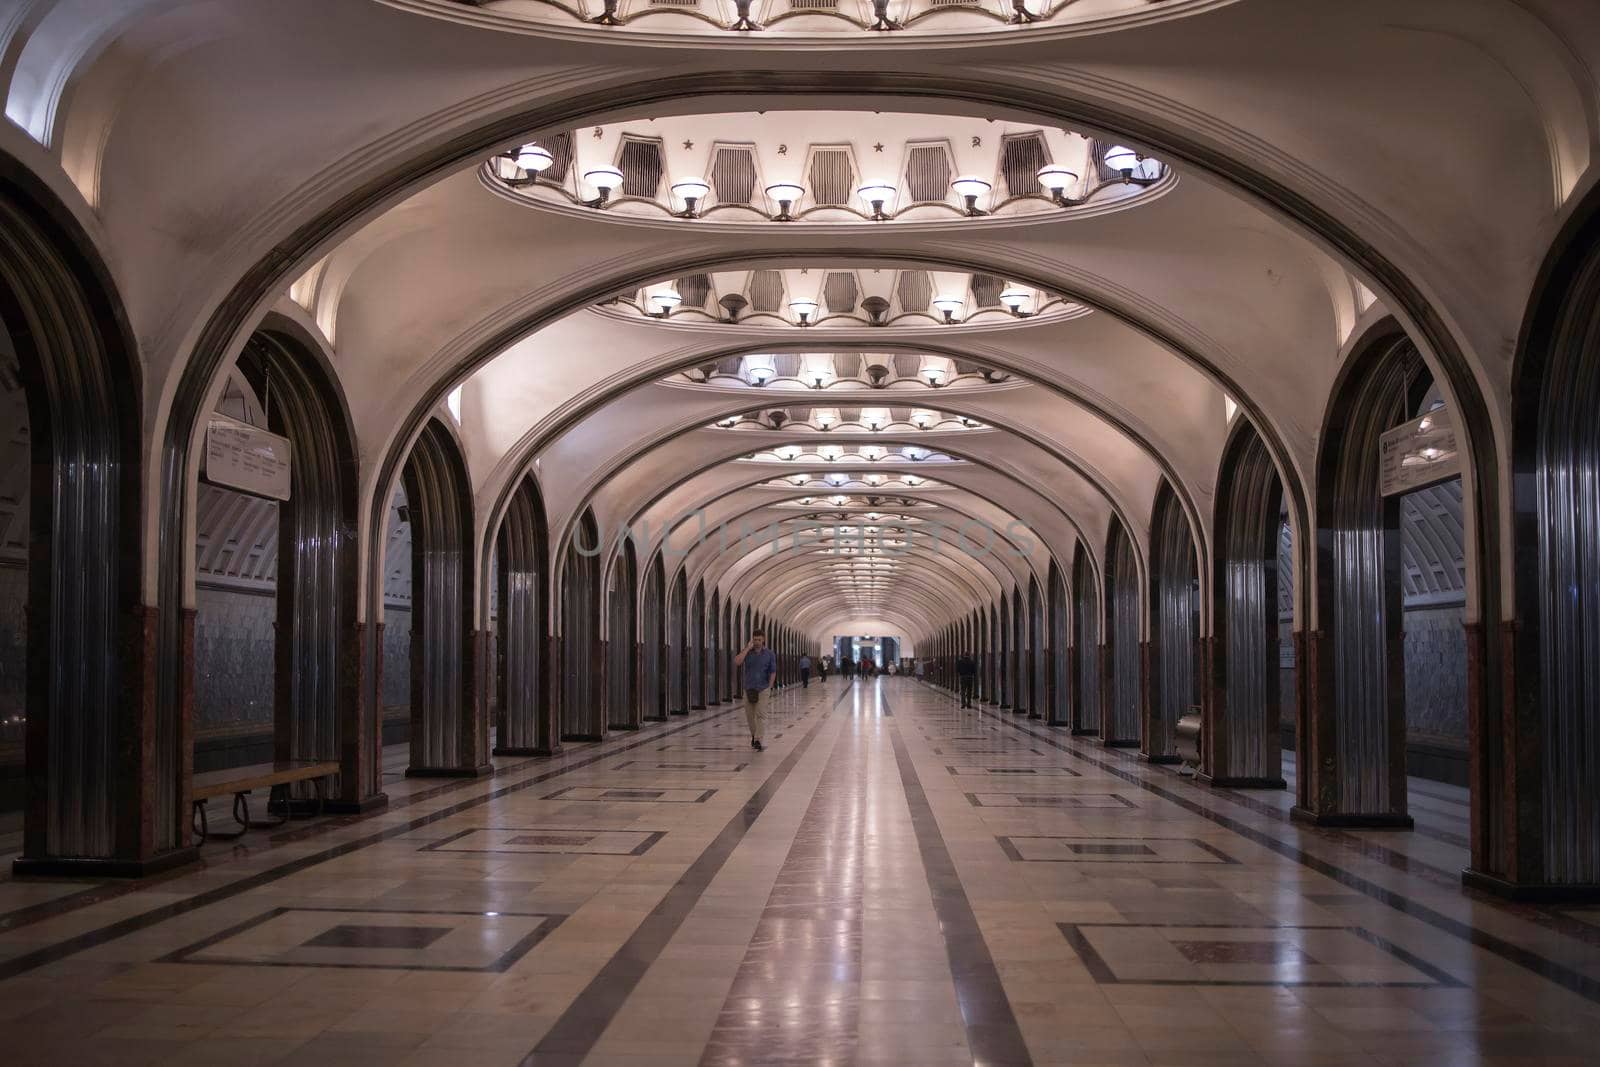 Moscow, Russia - 1 February 2022, The lobby of the Mayakovskaya station with arches and mosaic ceilings. Stalinist Empire